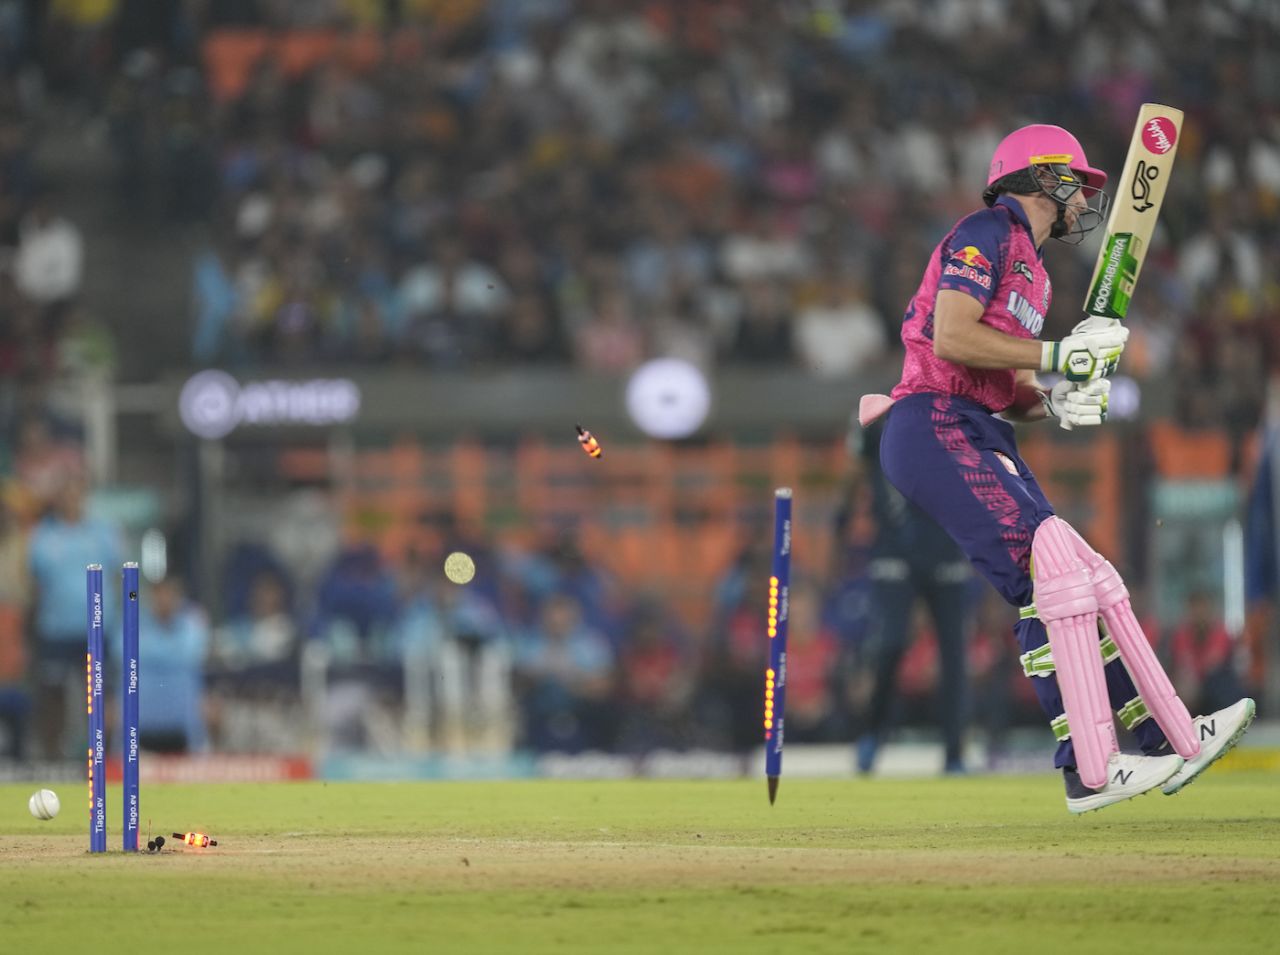 Jos Buttler missed the paddle and his off stump went for a dance, Gujarat Titans vs Rajasthan Royals, IPL 2023, Ahmedabad, April 16, 2023